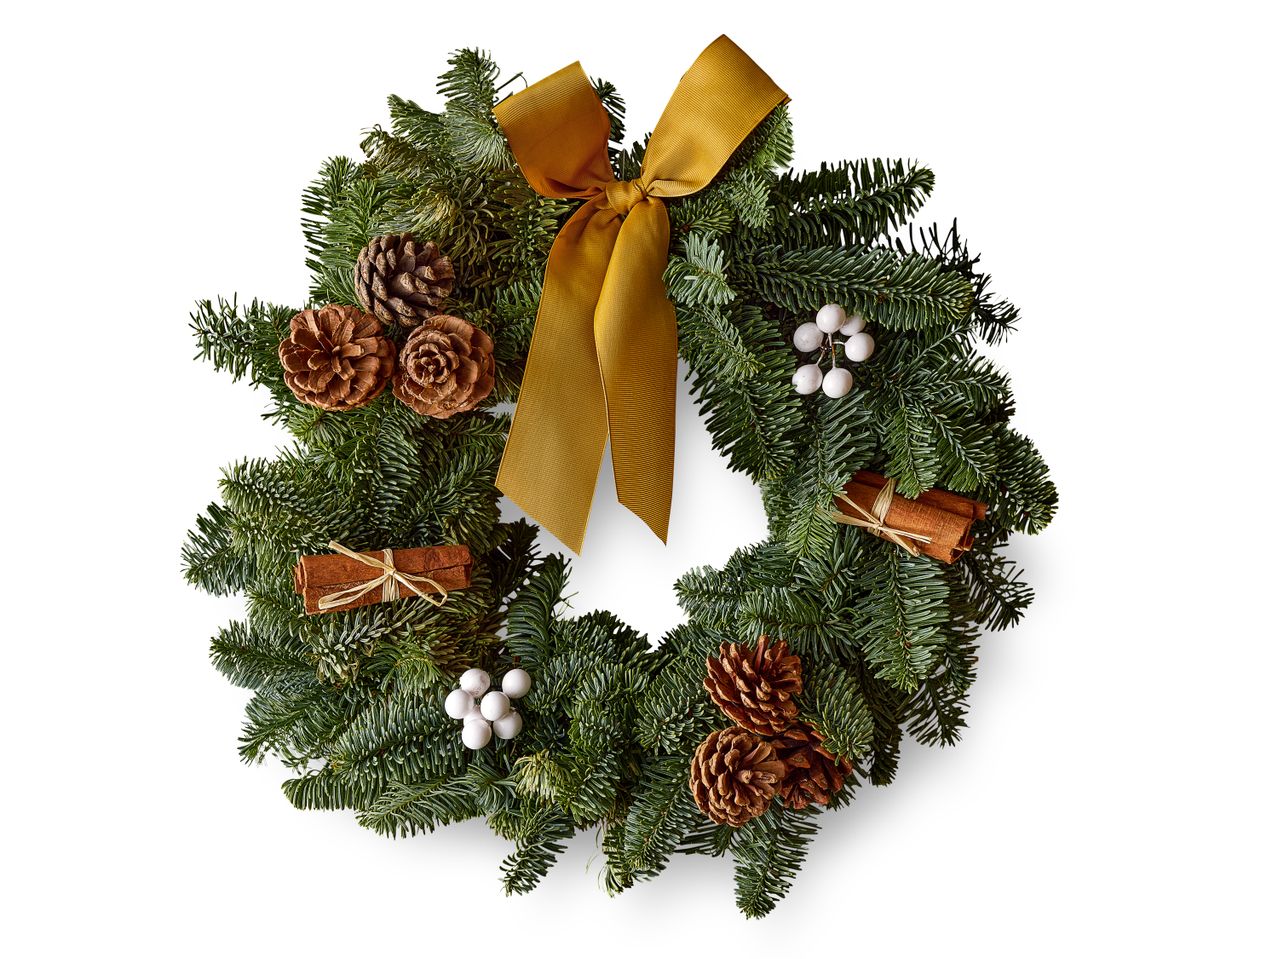 Go to full screen view: Deluxe British Large Christmas Wreath - Image 1